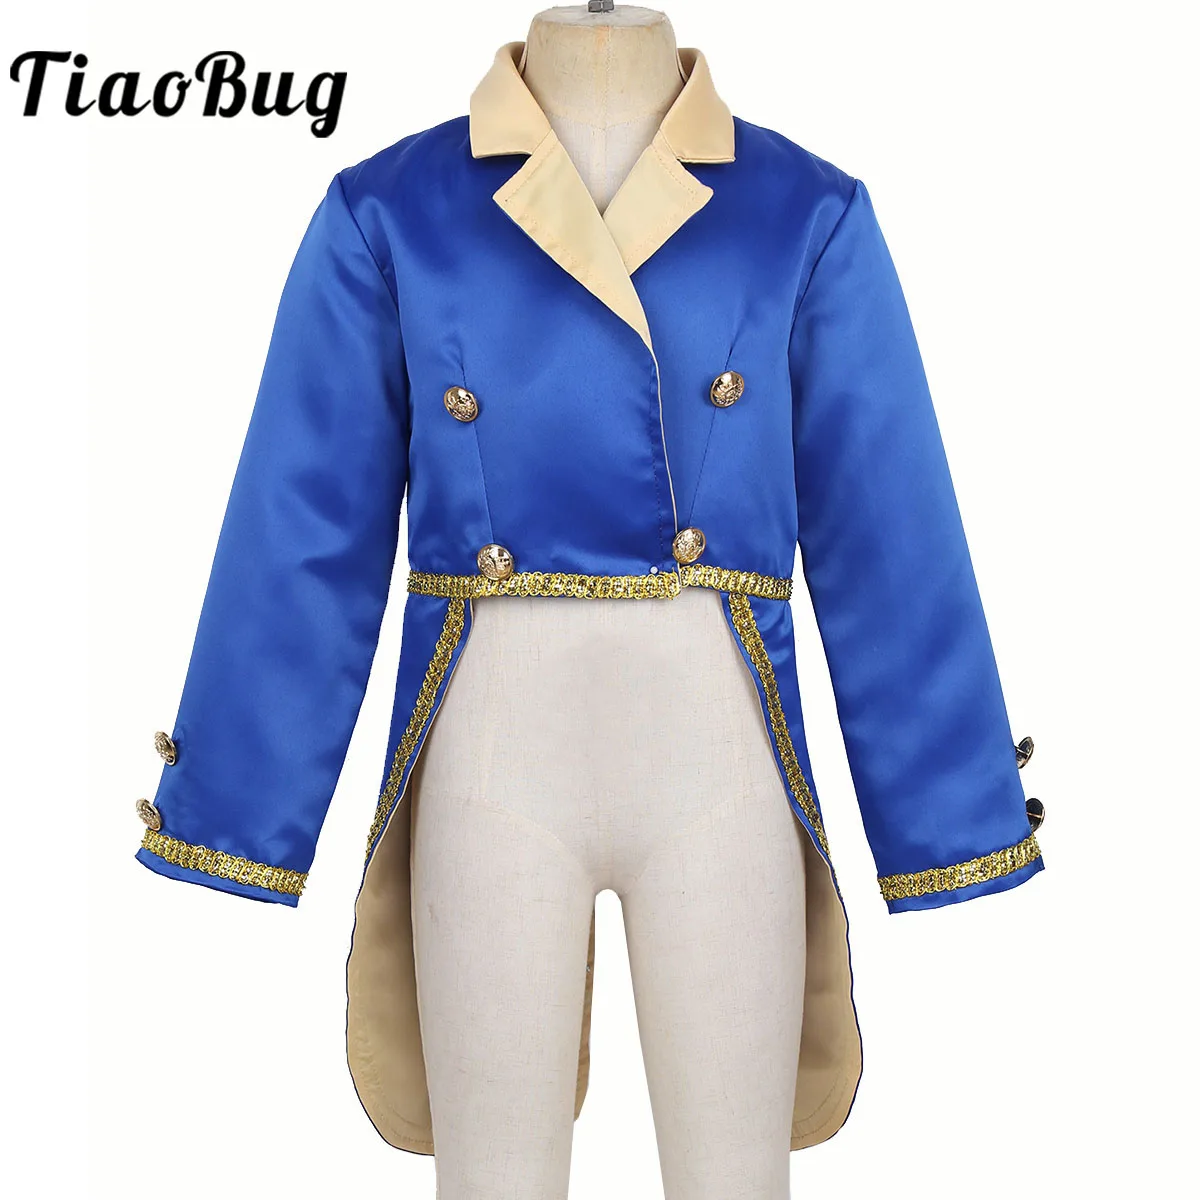 Baby Boys Prince Costume Kids Halloween Cosplay Turn-Down Collar Tailcoat Tuxedo Jacket Fancy Dress Up Theme Party Clothes